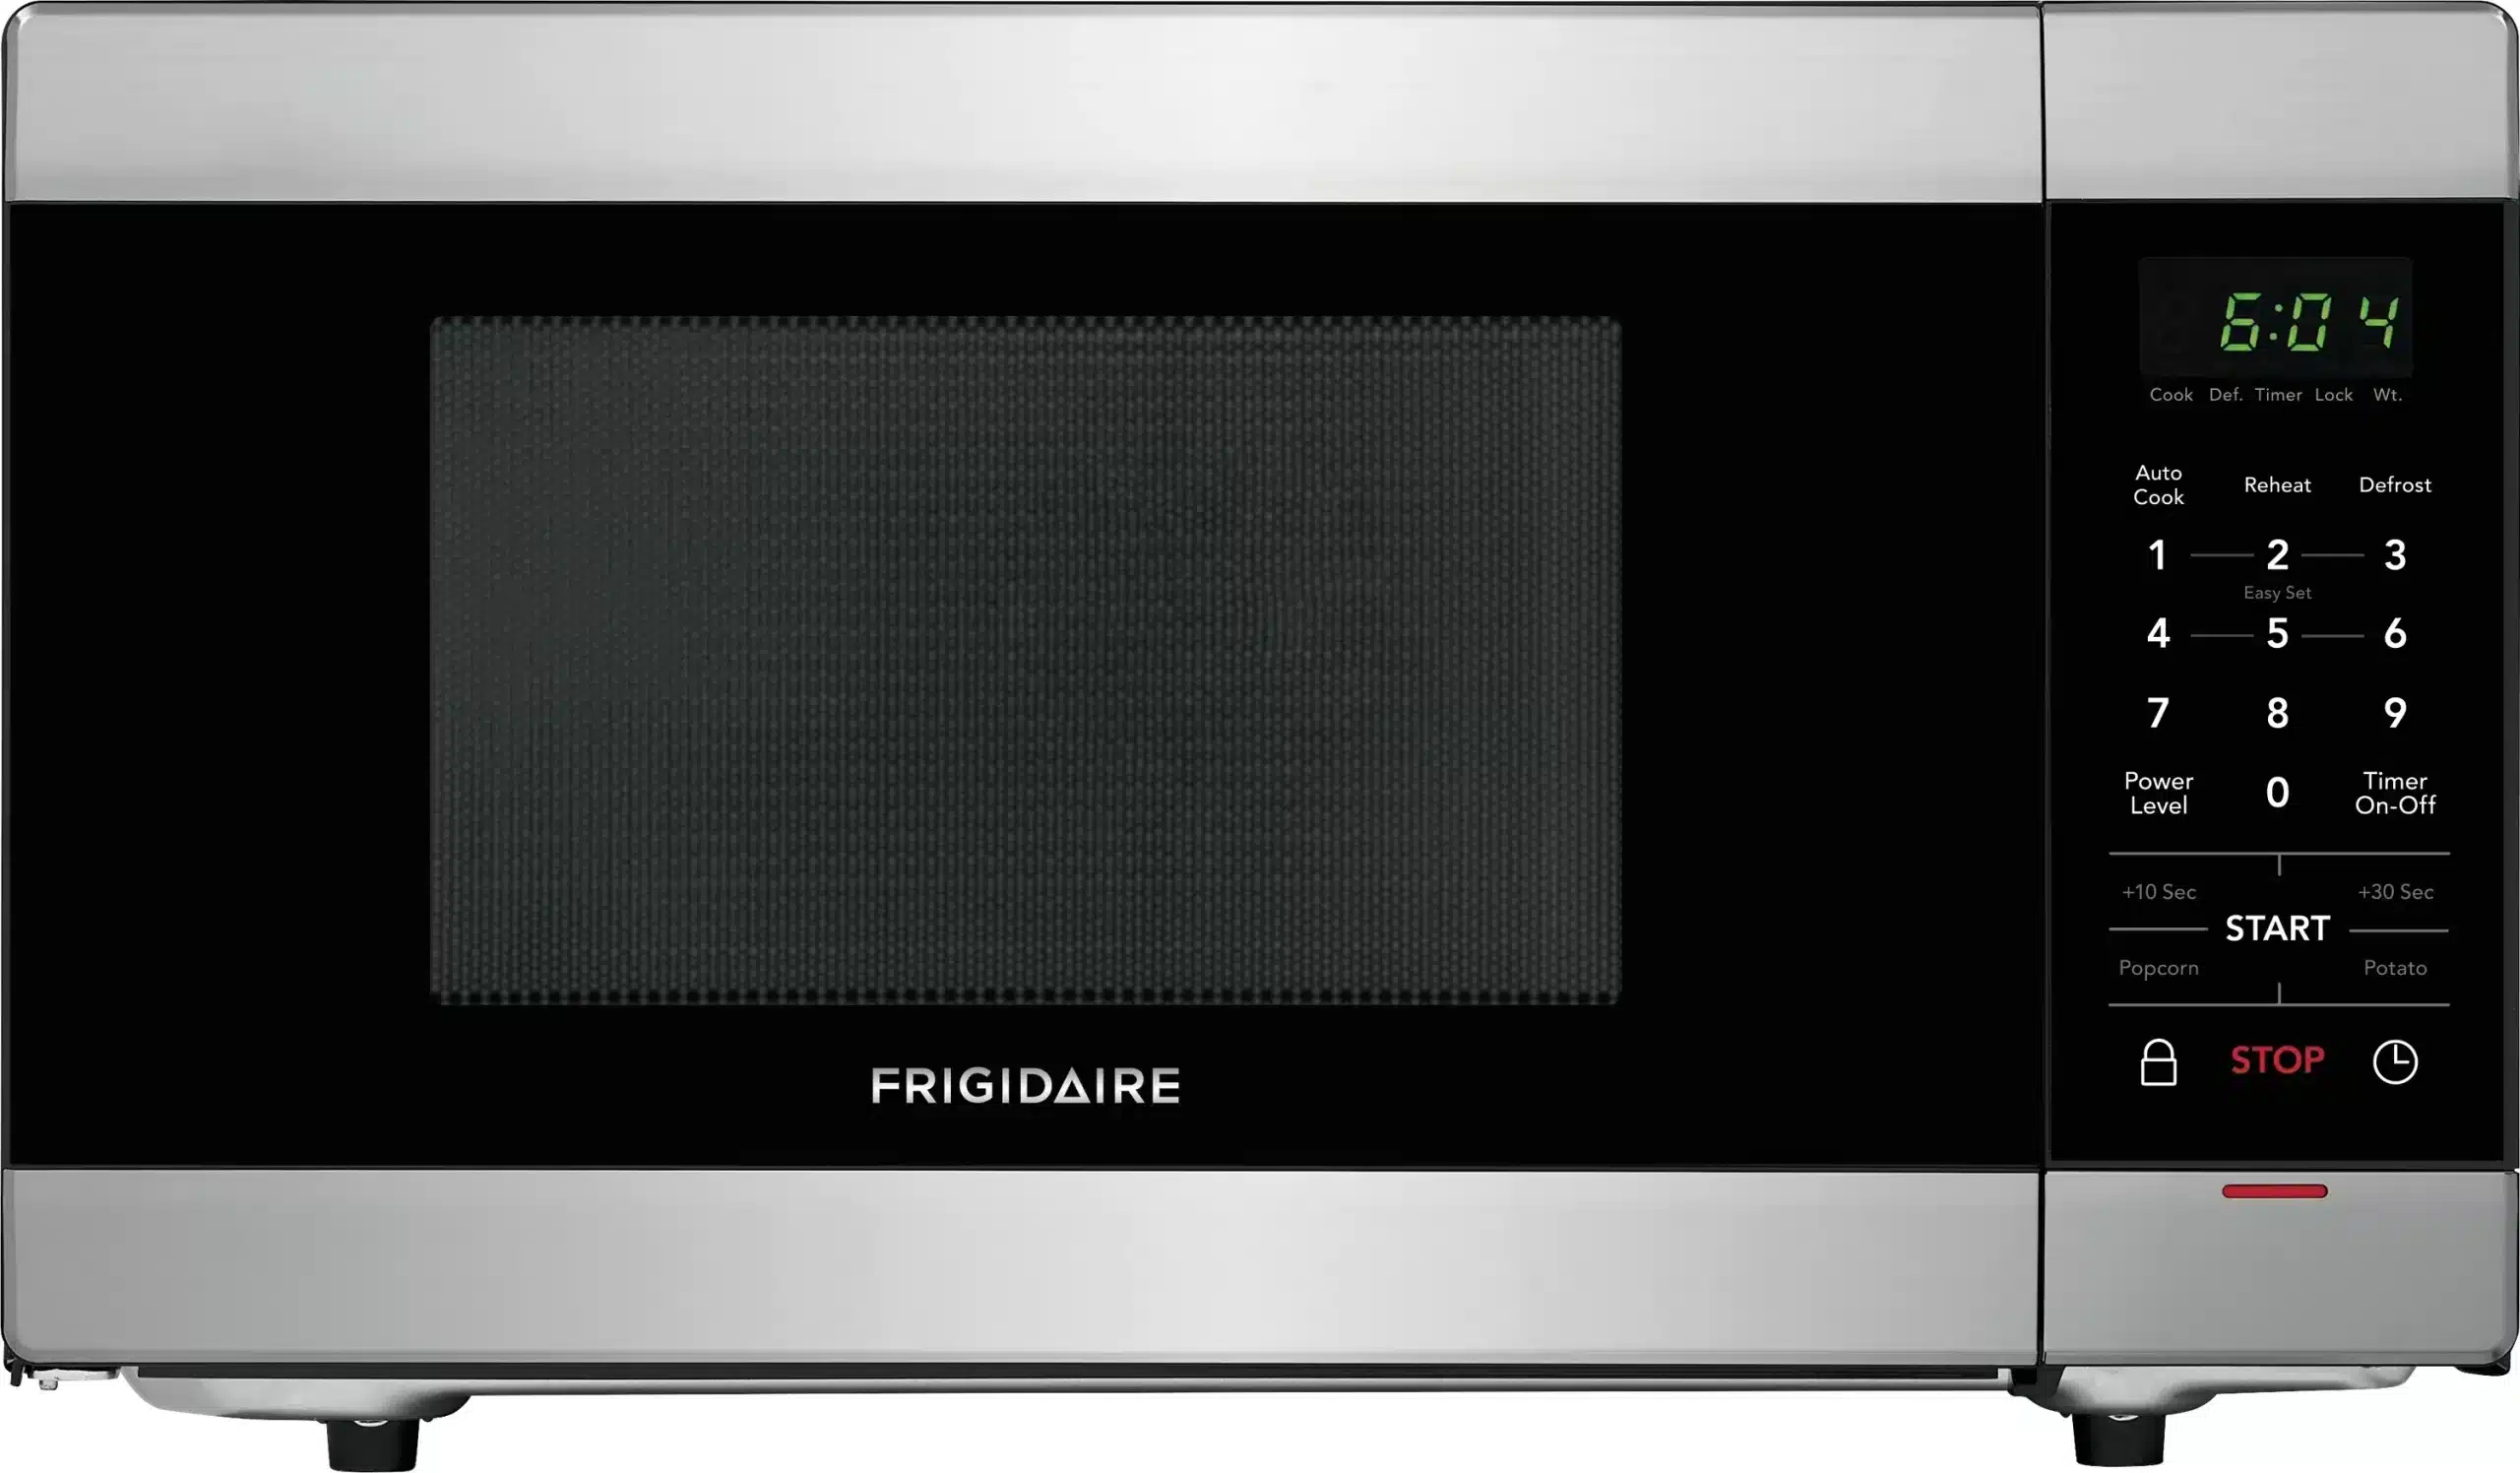 How to Unlock a Frigidaire Microwave